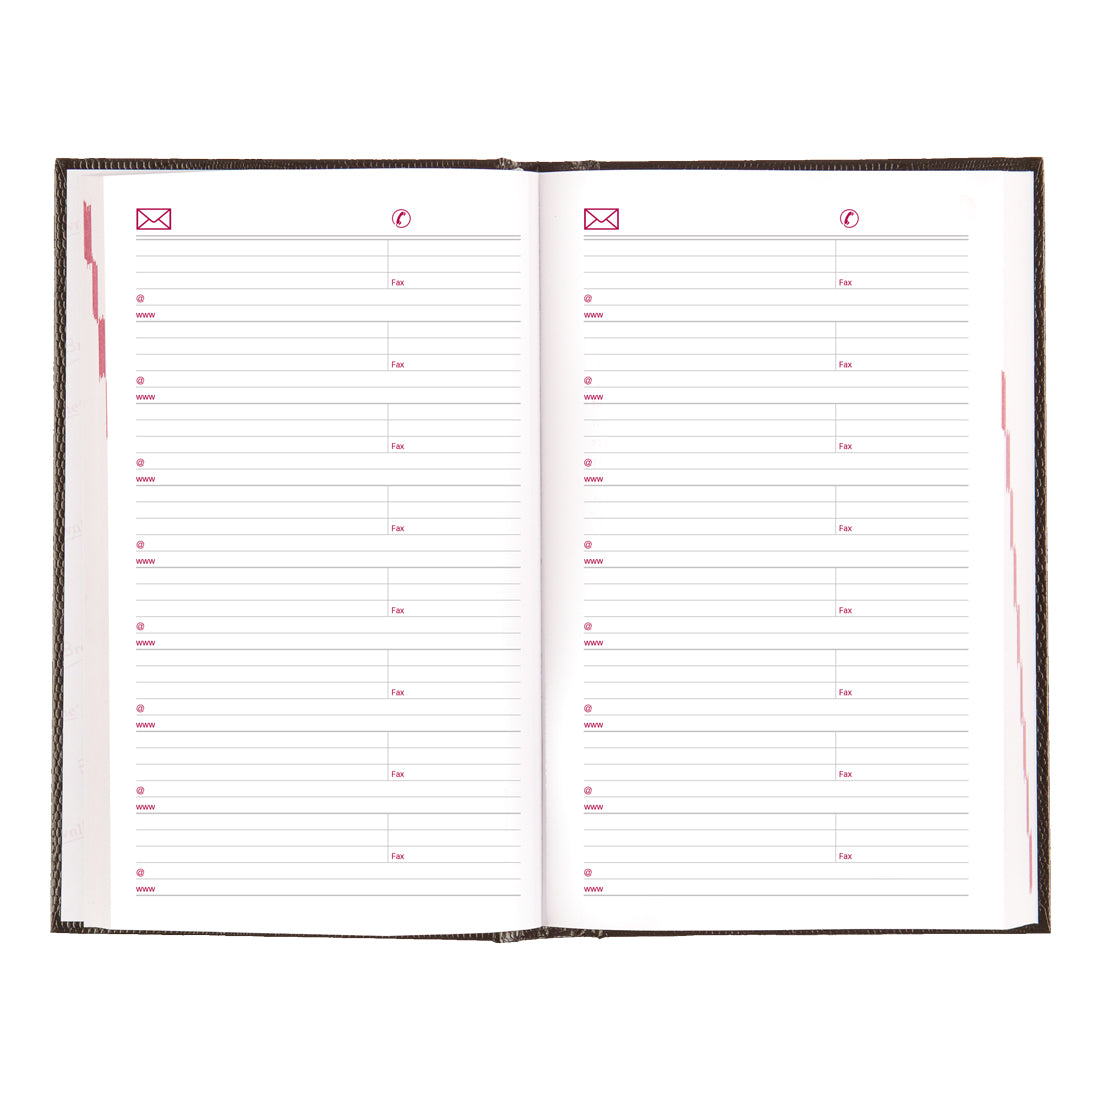 Daily Planner 2024, Black